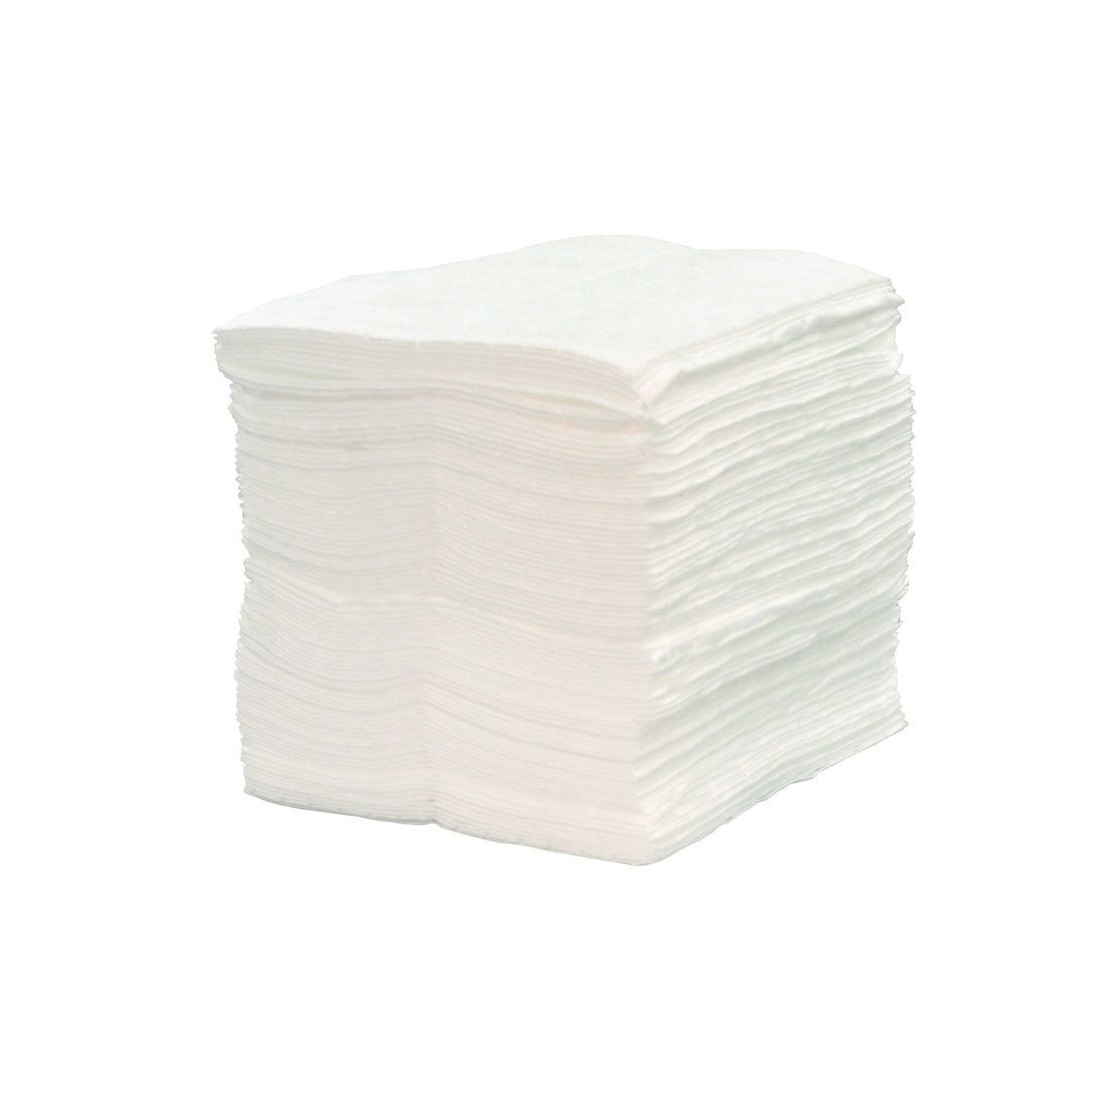 Chemtex PWB200HL Meltblown Pad, 15 in W, 18 in L, 7-1/2 in, 19 in Perforated, Polypropylene, White